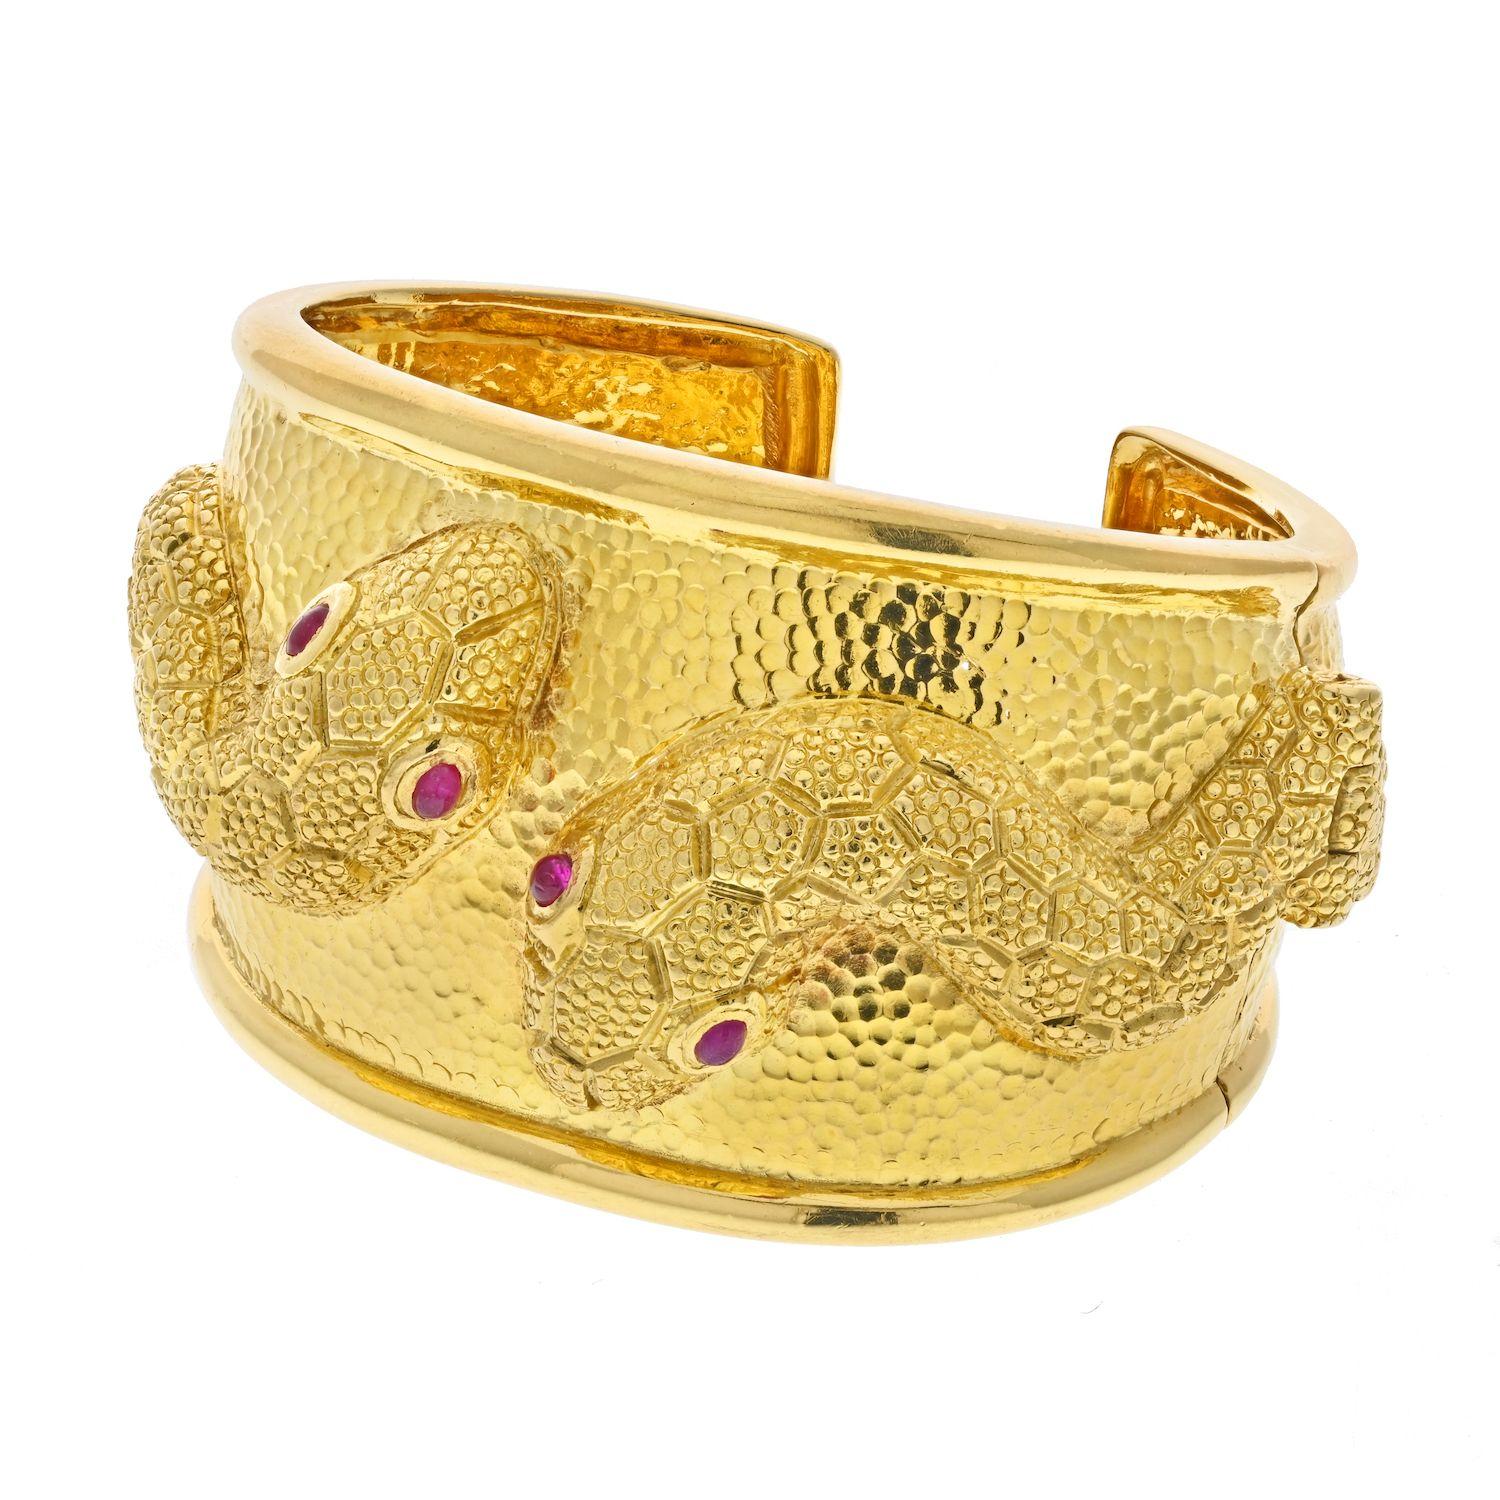 David Webb 18K Yellow Gold Twin Serpent Cuff Bracelet. 
From Kingdom Collection Twin Serpent Cuff Bracelet by David Webb, crafted in 18k yellow gold and set with cabochon rubies for eyes. Width from 40mm to 23mm. Wrist size 6.5 inches. 

